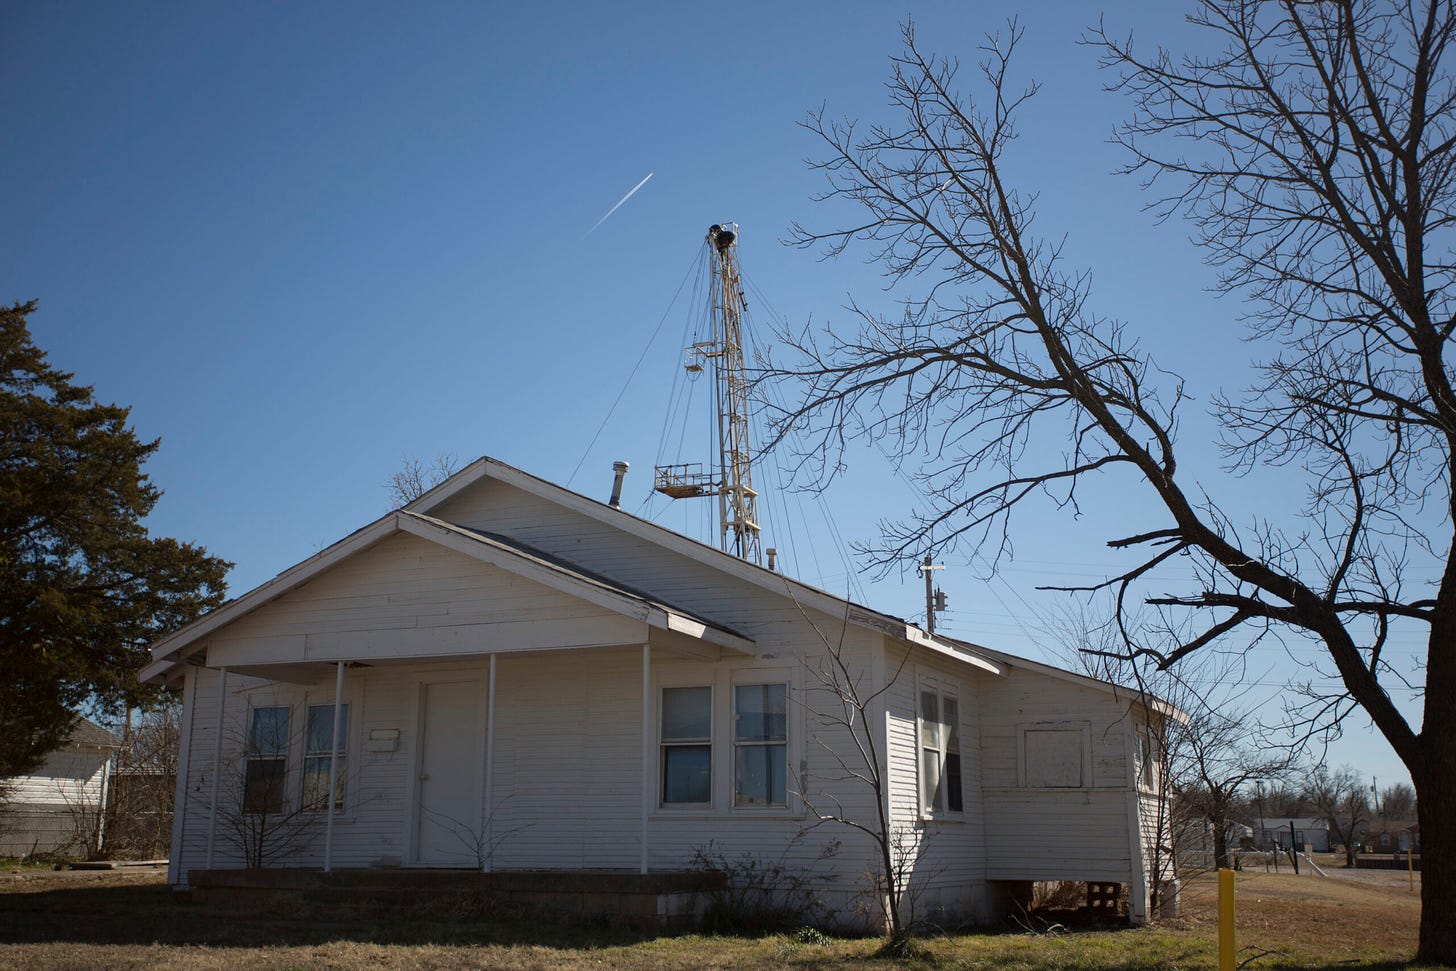 A new fracking rig operates behind a house Feb. 10, 2016 in an Oklahoma City, Oklahoma neighborhood. Credit: J Pat Carter/Getty Images